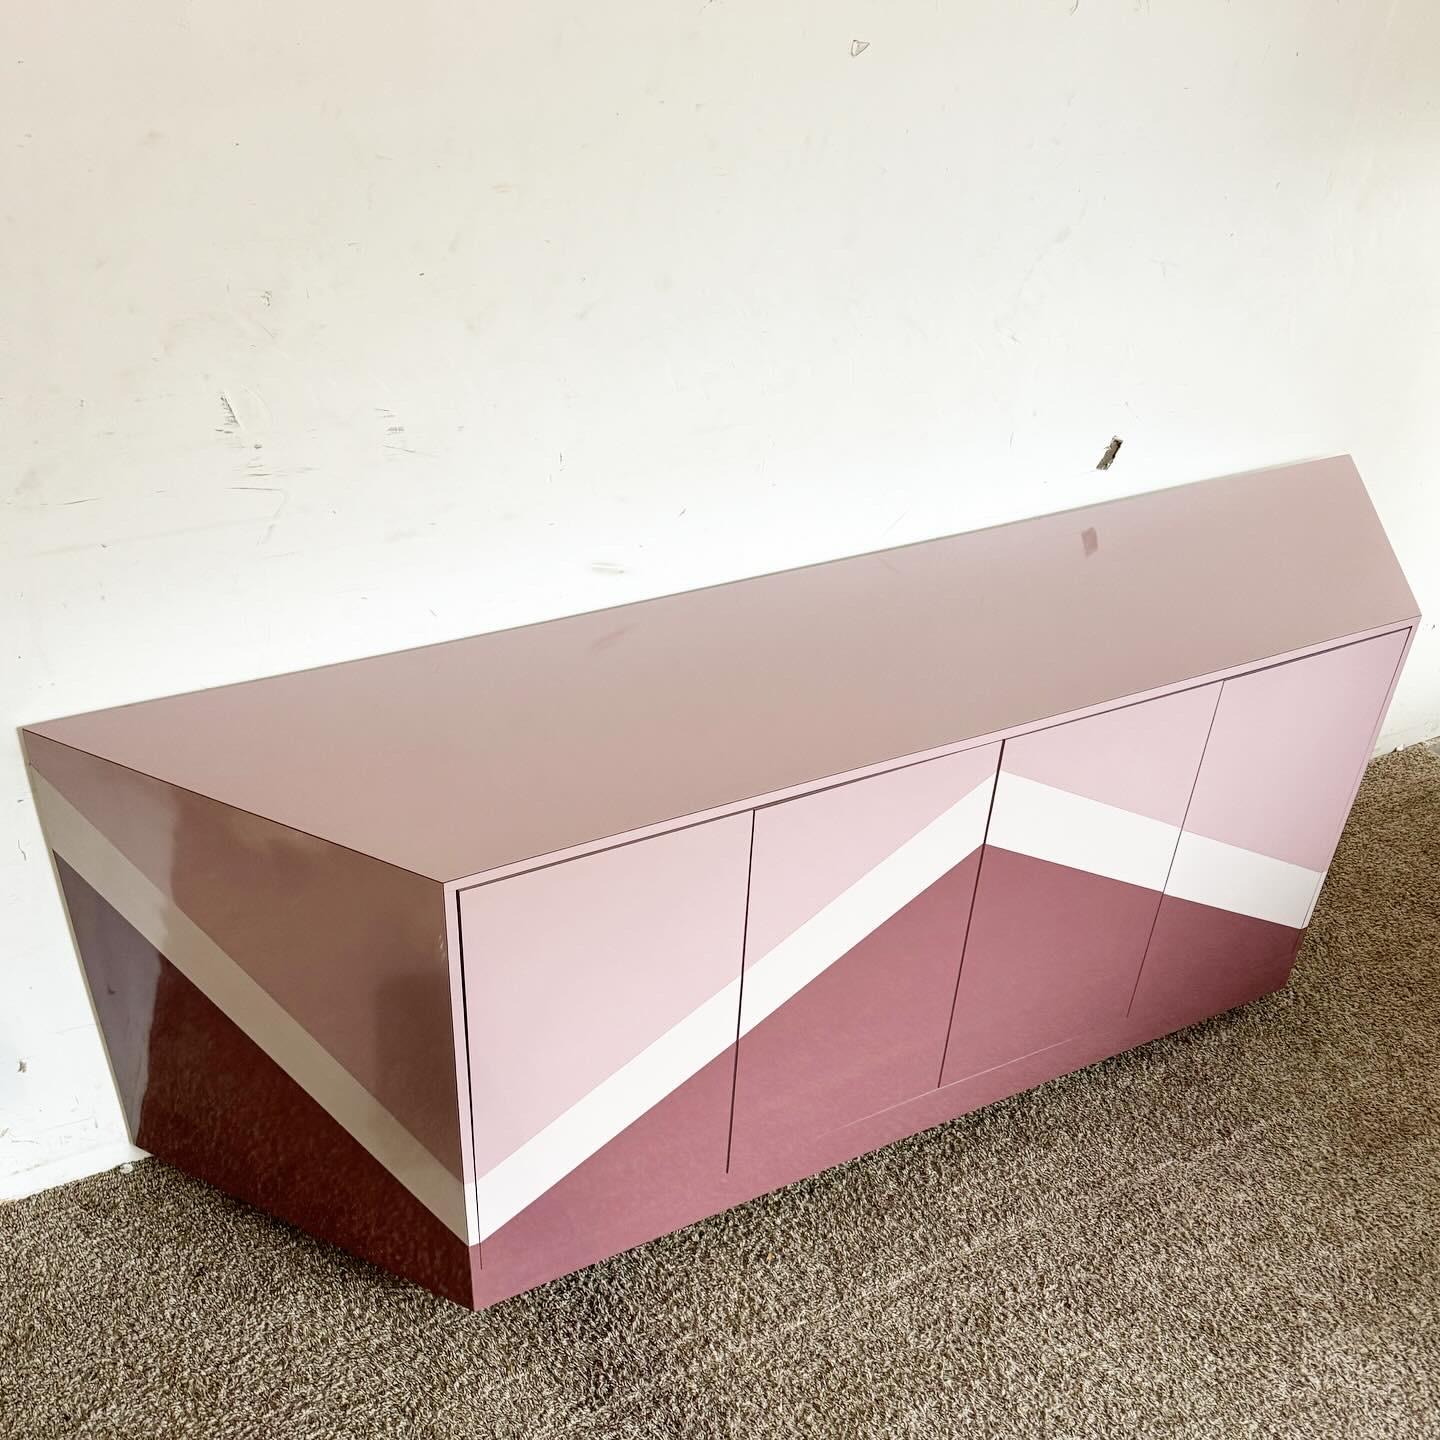 Late 20th Century Postmodern Purple Pink and Mauve Lacquer Laminate Credenza For Sale